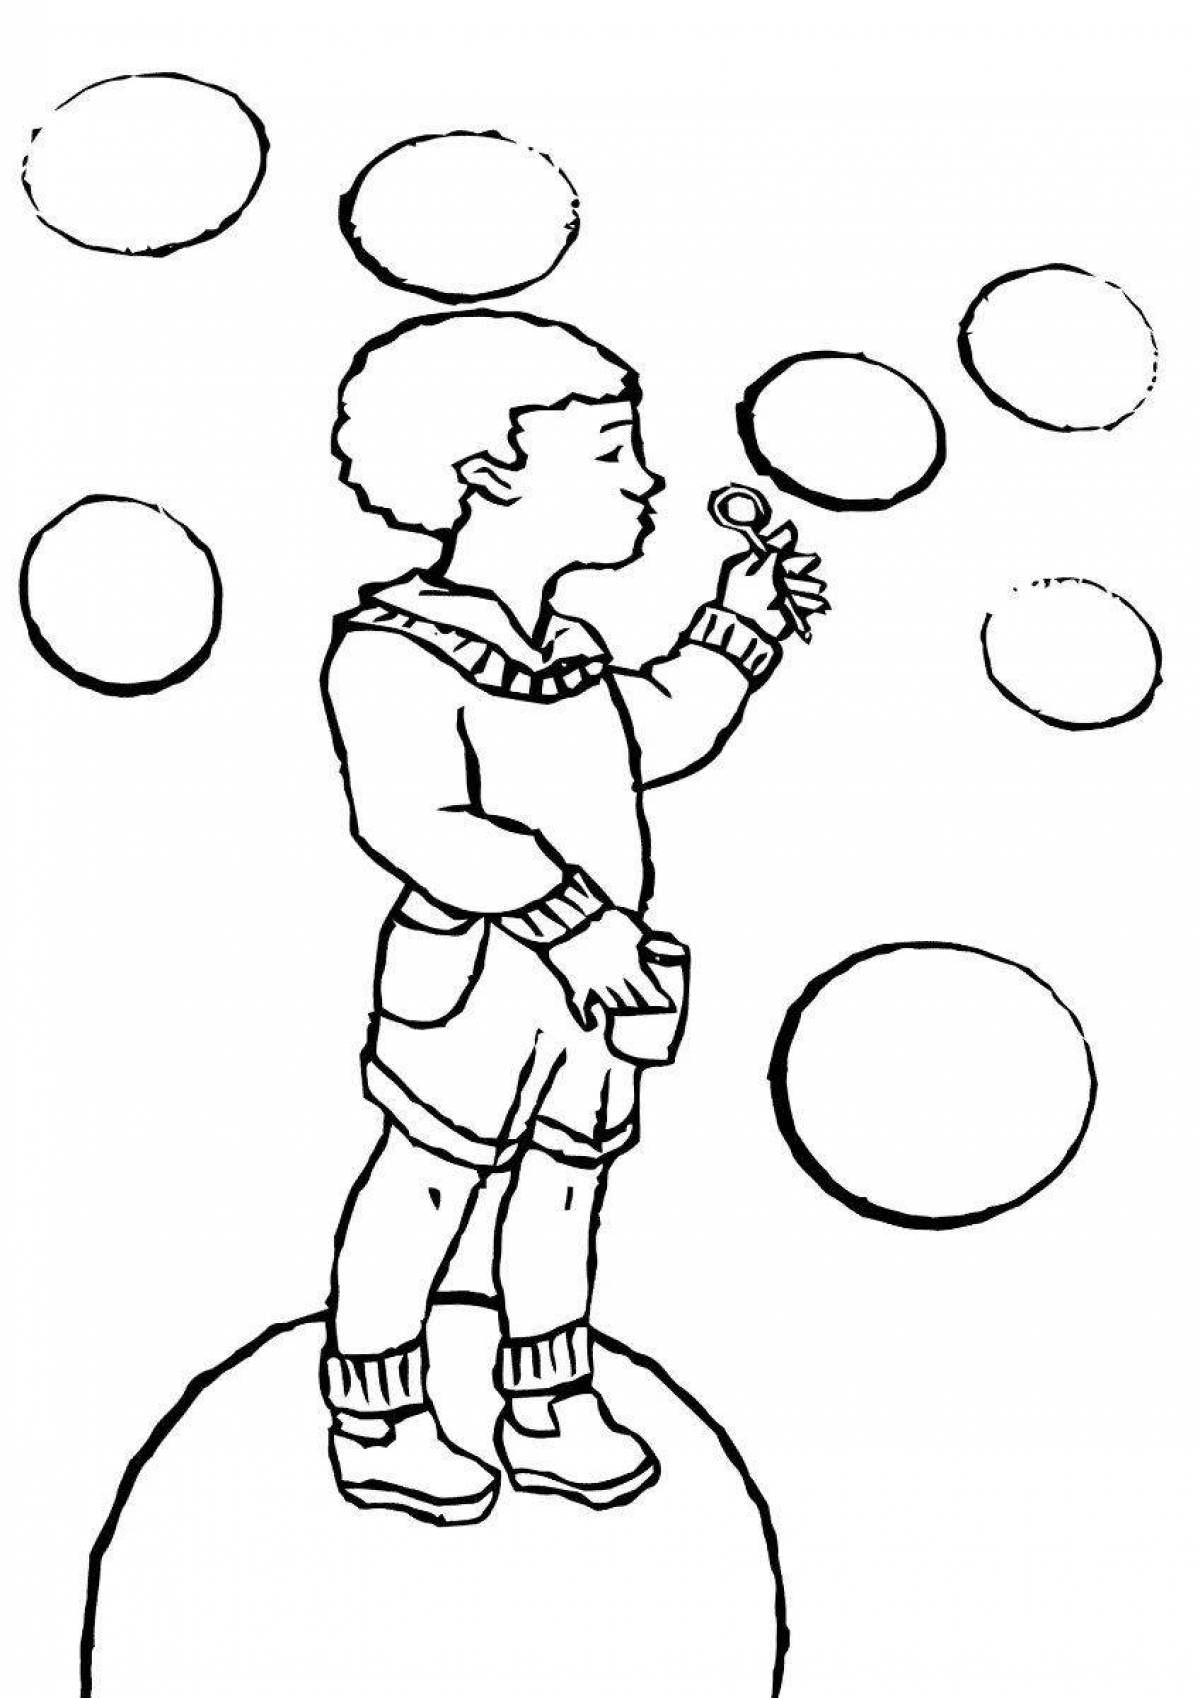 Glowing bubbles coloring page